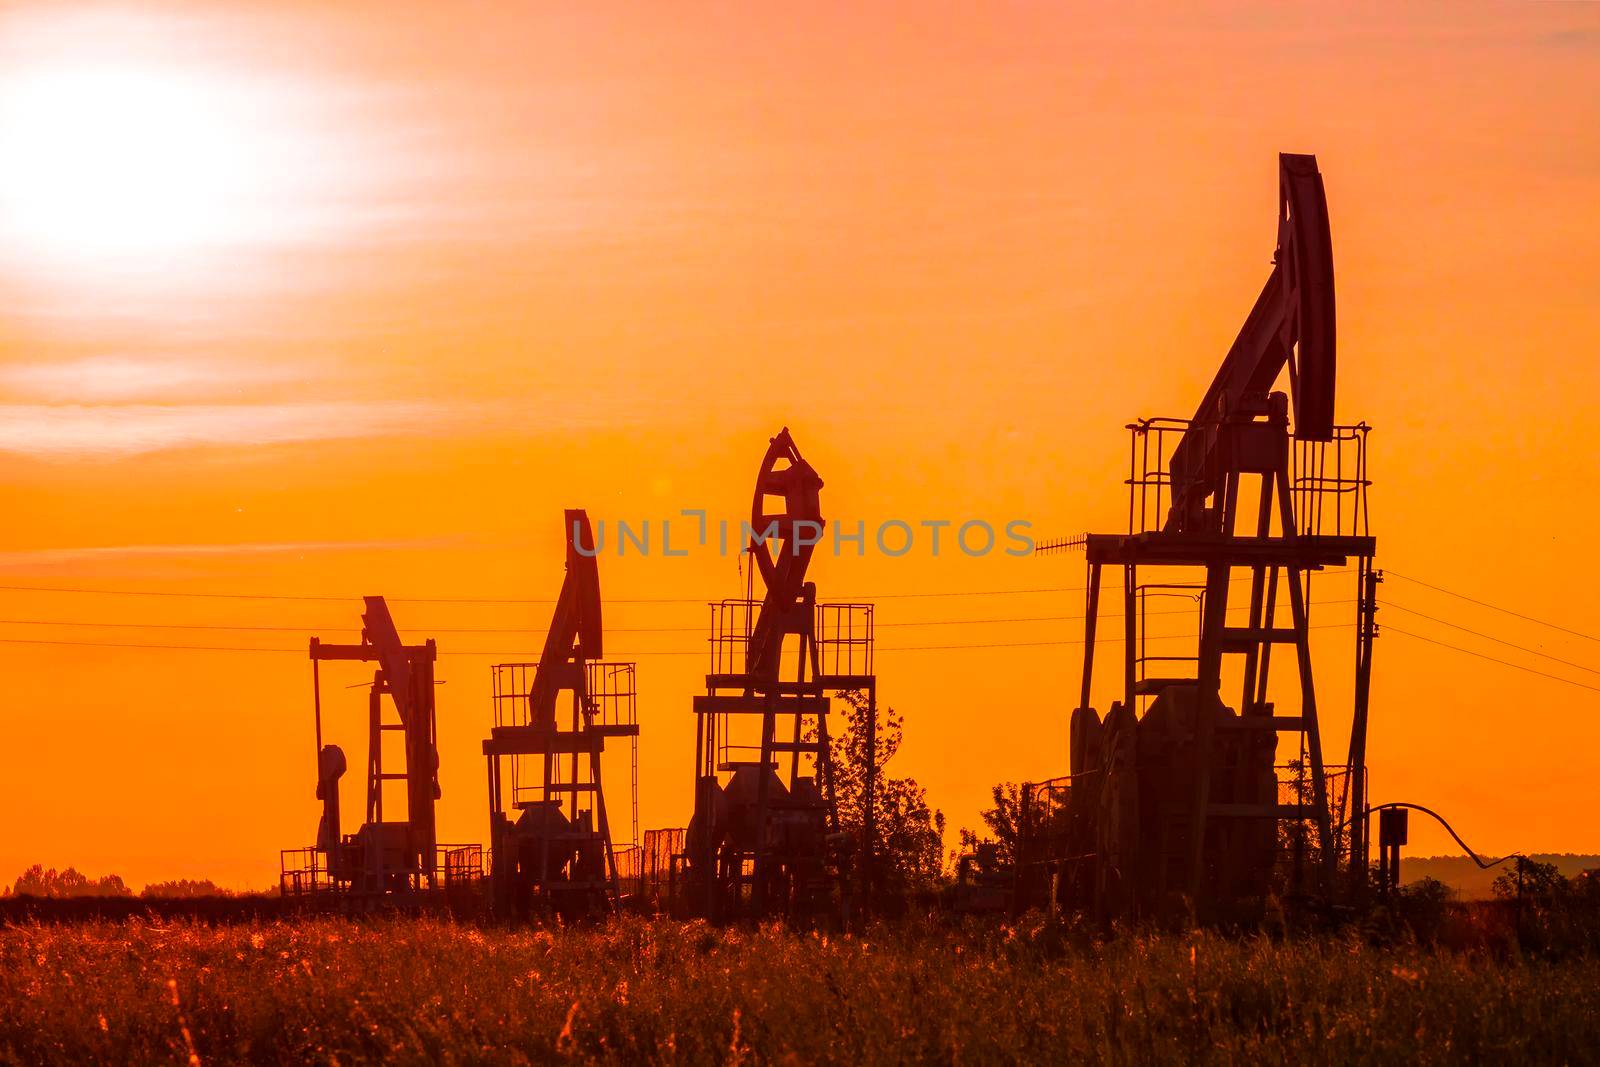 The silhouette of oil pumps in a large oil field at sunrise. by Essffes